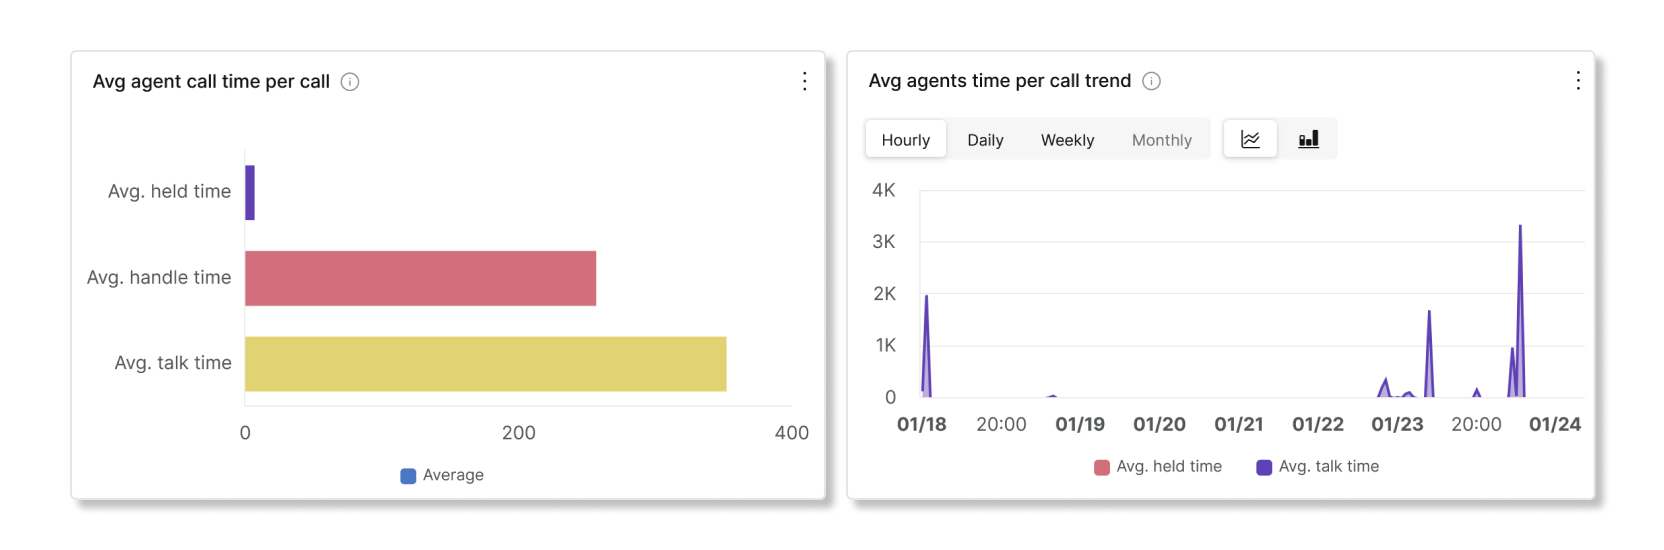 Avg agent call minutes per call and trend charts in call queue agent stats analytics